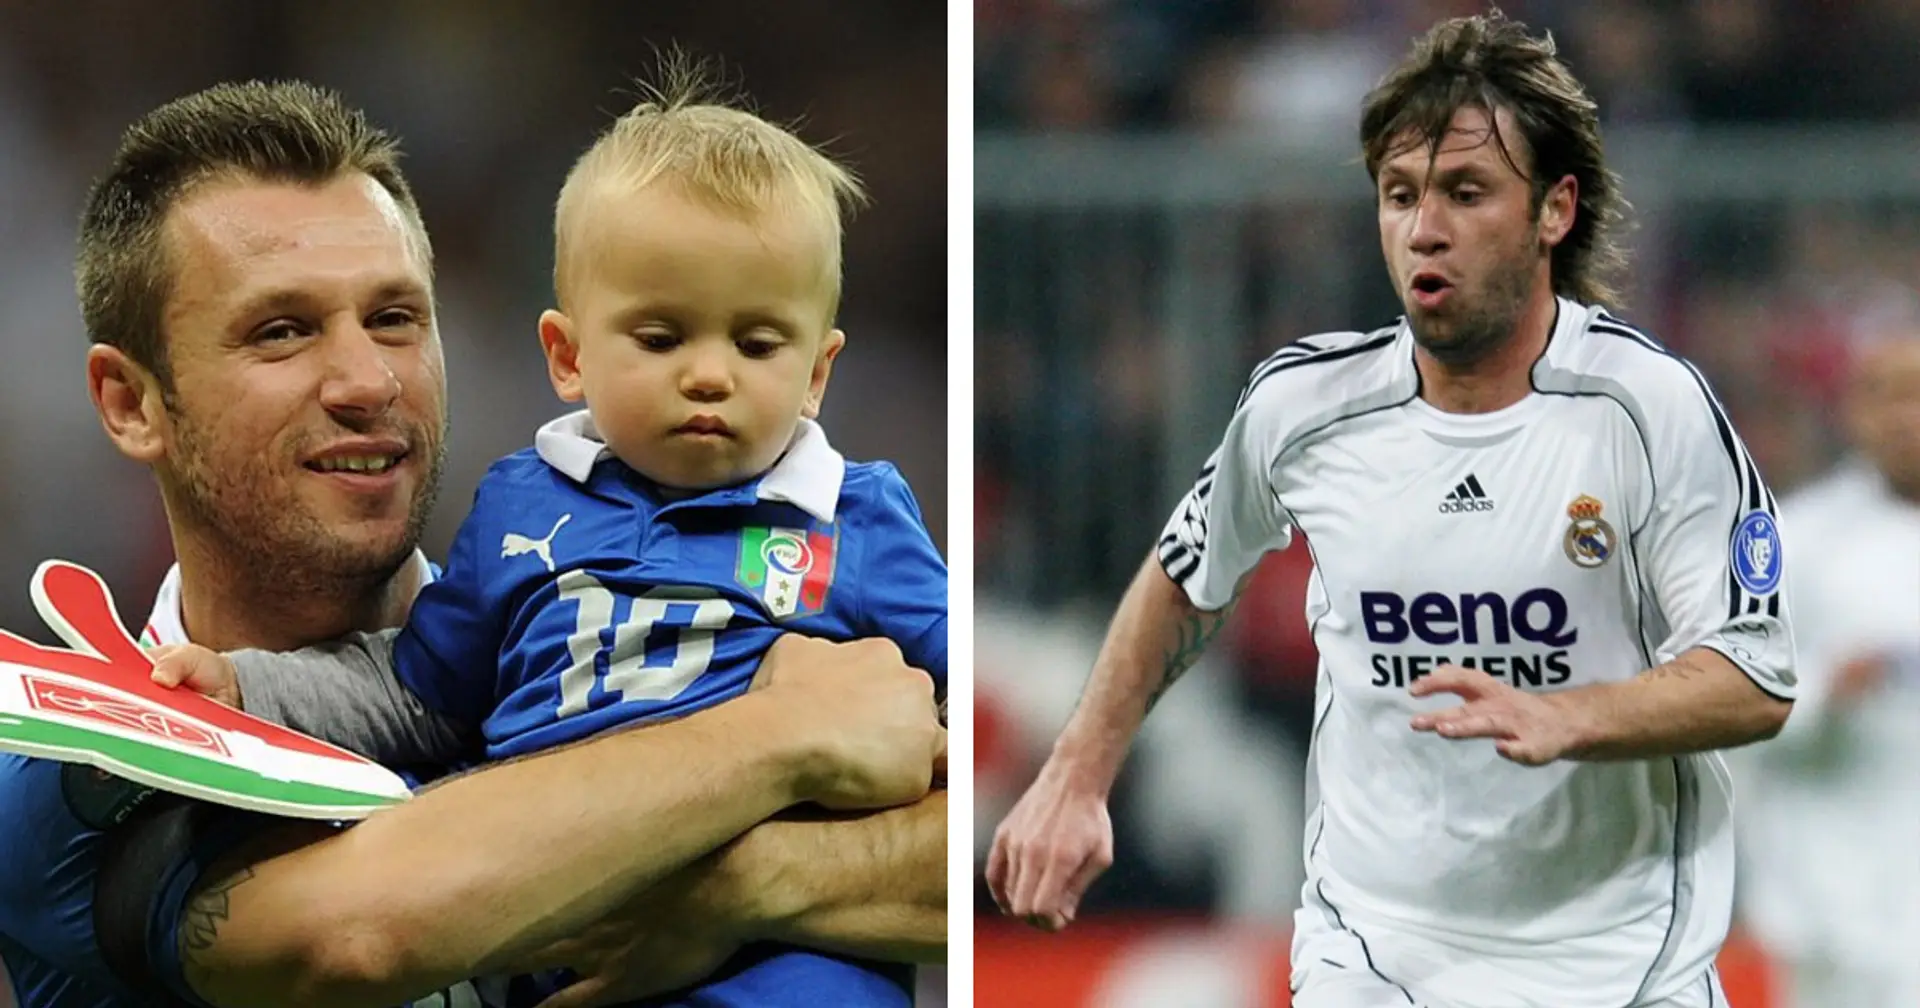 'In honour of my idol': Antonio Cassano's son is named after Leo Messi